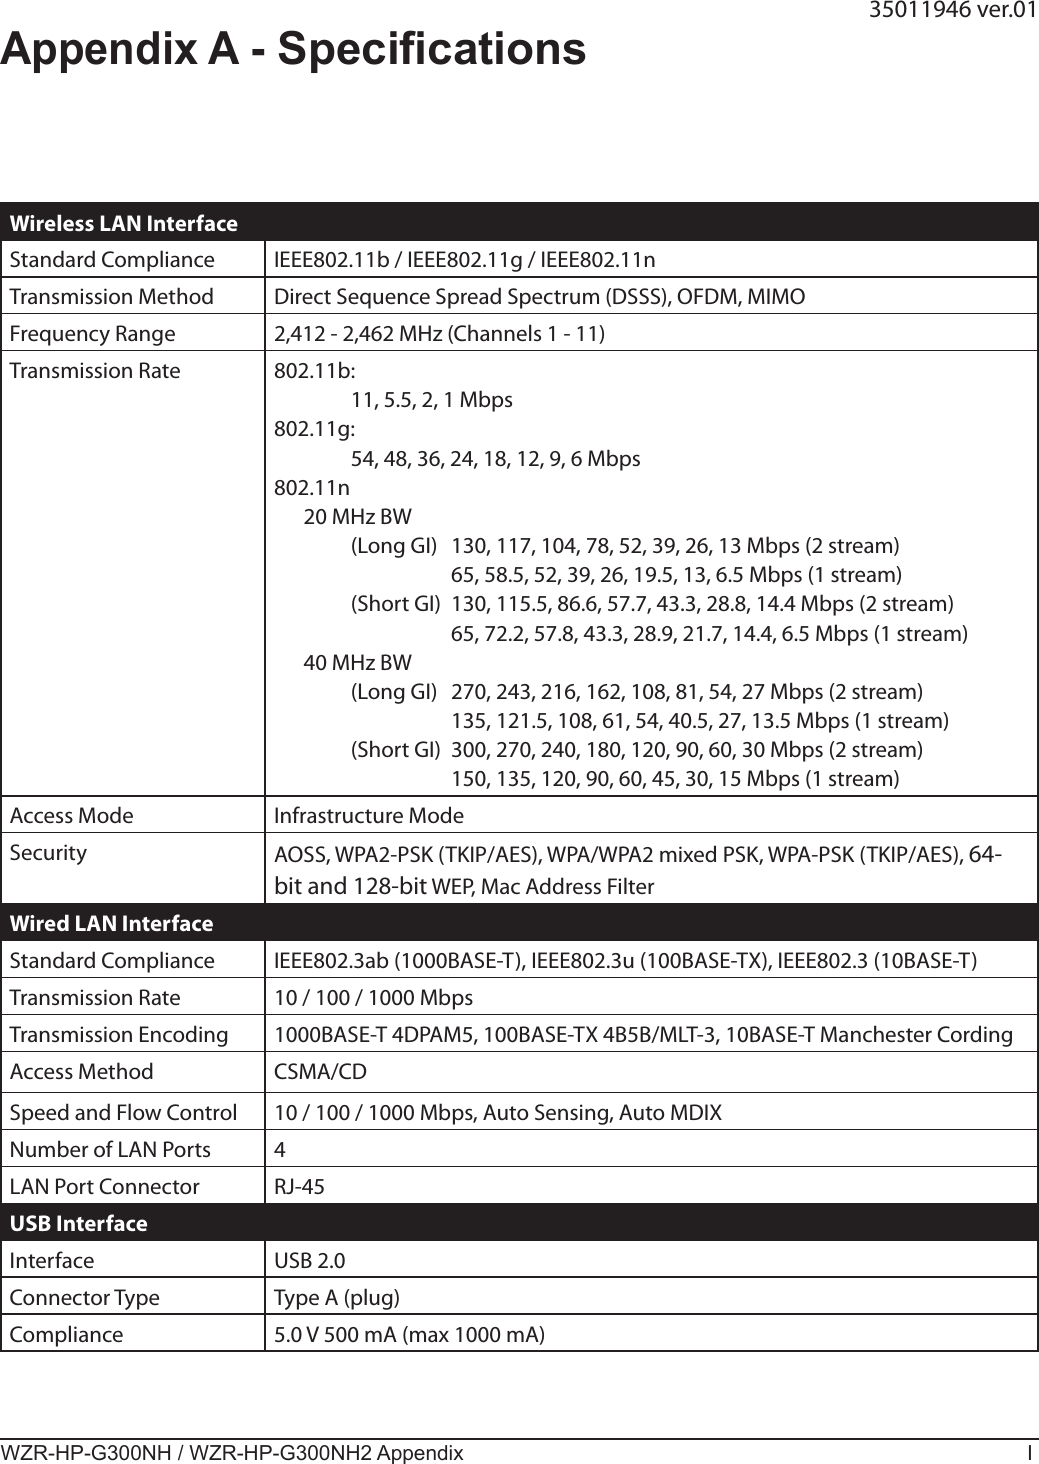 WZR-HP-G300NH / WZR-HP-G300NH2 Appendix IWireless LAN InterfaceStandard Compliance IEEE802.11b / IEEE802.11g / IEEE802.11nTransmission Method Direct Sequence Spread Spectrum (DSSS), OFDM, MIMOFrequency Range 2,412 - 2,462 MHz (Channels 1 - 11)Transmission Rate 802.11b:    11, 5.5, 2, 1 Mbps802.11g:    54, 48, 36, 24, 18, 12, 9, 6 Mbps802.11n  20 MHz BW    (Long GI)  130, 117, 104, 78, 52, 39, 26, 13 Mbps (2 stream)      65, 58.5, 52, 39, 26, 19.5, 13, 6.5 Mbps (1 stream)    (Short GI)  130, 115.5, 86.6, 57.7, 43.3, 28.8, 14.4 Mbps (2 stream)      65, 72.2, 57.8, 43.3, 28.9, 21.7, 14.4, 6.5 Mbps (1 stream)  40 MHz BW    (Long GI)  270, 243, 216, 162, 108, 81, 54, 27 Mbps (2 stream)      135, 121.5, 108, 61, 54, 40.5, 27, 13.5 Mbps (1 stream)    (Short GI)  300, 270, 240, 180, 120, 90, 60, 30 Mbps (2 stream)      150, 135, 120, 90, 60, 45, 30, 15 Mbps (1 stream)Access Mode Infrastructure ModeSecurity AOSS, WPA2-PSK (TKIP/AES), WPA/WPA2 mixed PSK, WPA-PSK (TKIP/AES), 64-bit and 128-bit WEP, Mac Address FilterWired LAN InterfaceStandard Compliance IEEE802.3ab (1000BASE-T), IEEE802.3u (100BASE-TX), IEEE802.3 (10BASE-T)Transmission Rate 10 / 100 / 1000 MbpsTransmission Encoding 1000BASE-T 4DPAM5, 100BASE-TX 4B5B/MLT-3, 10BASE-T Manchester CordingAccess Method CSMA/CDSpeed and Flow Control 10 / 100 / 1000 Mbps, Auto Sensing, Auto MDIXNumber of LAN Ports 4LAN Port Connector RJ-45USB InterfaceInterface USB 2.0Connector Type Type A (plug)Compliance 5.0 V 500 mA (max 1000 mA)Appendix A - Specications35011946 ver.01